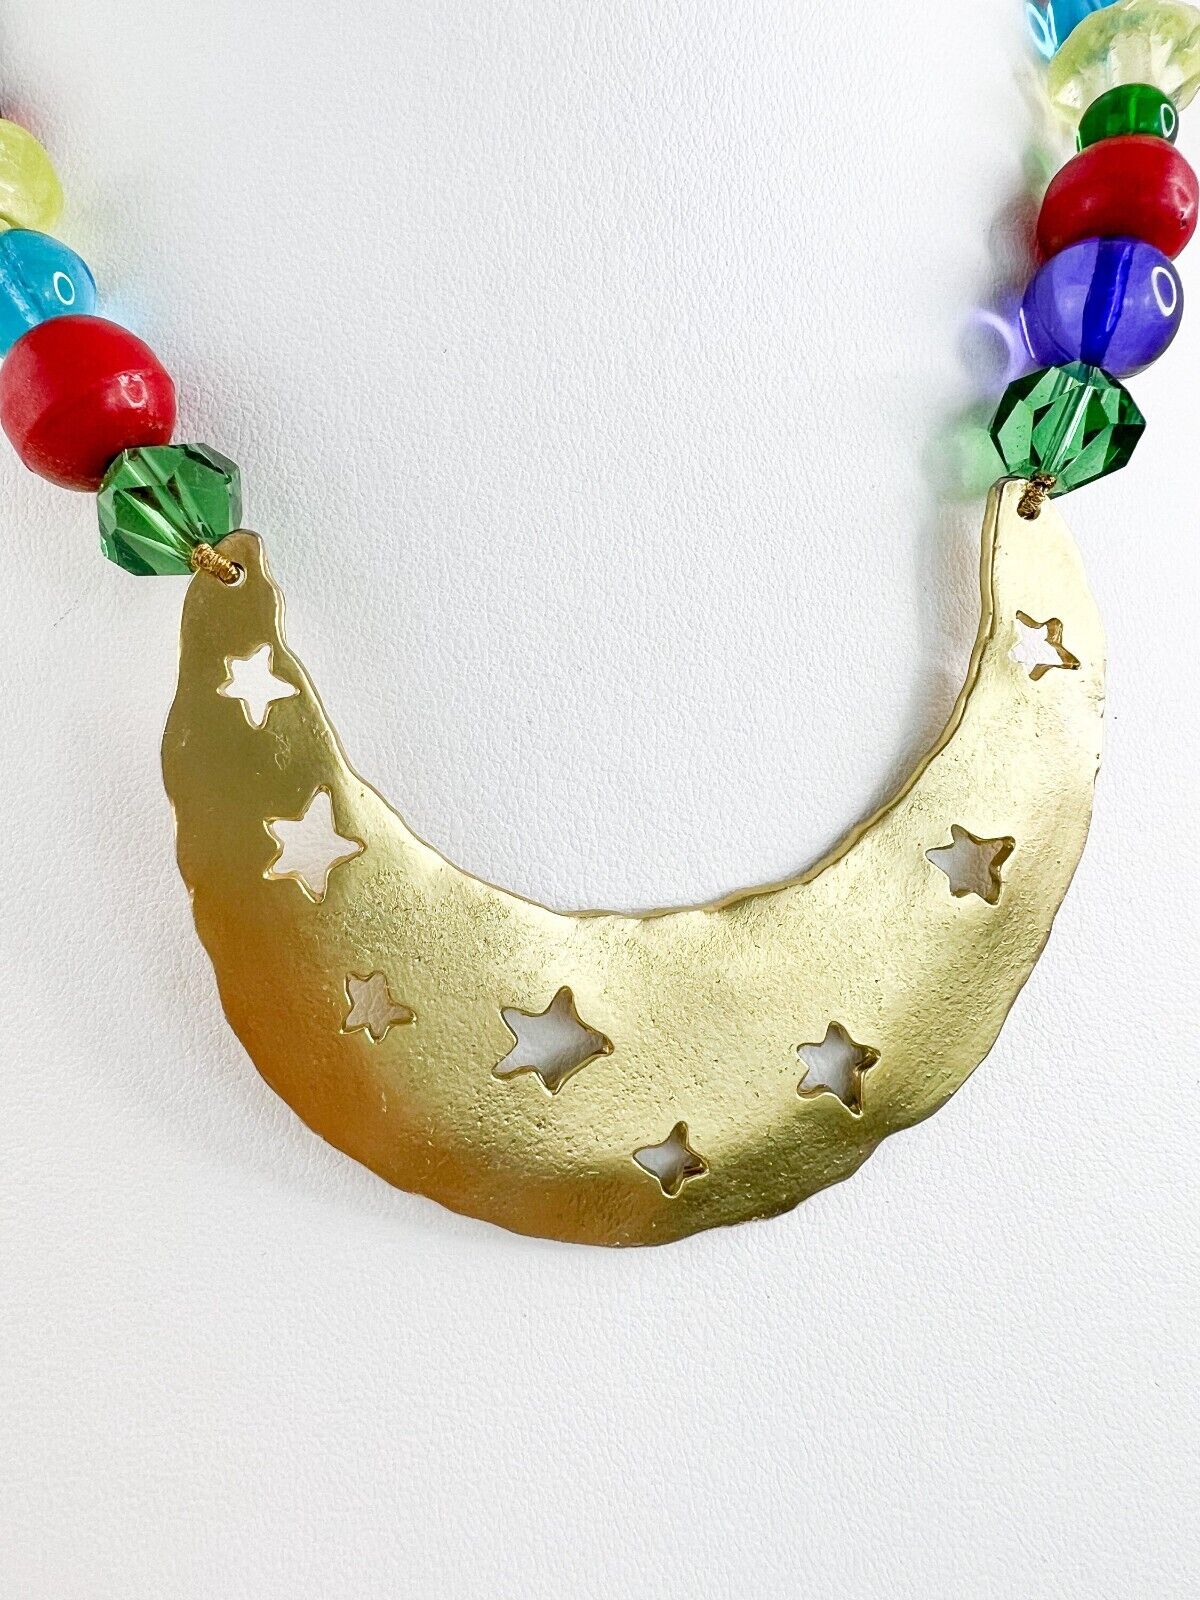 KENZO necklace, Vintage Kenzo moon necklace color glass bead choker, stars and moon necklace , vintage necklace Unisex, Jewelry for Women